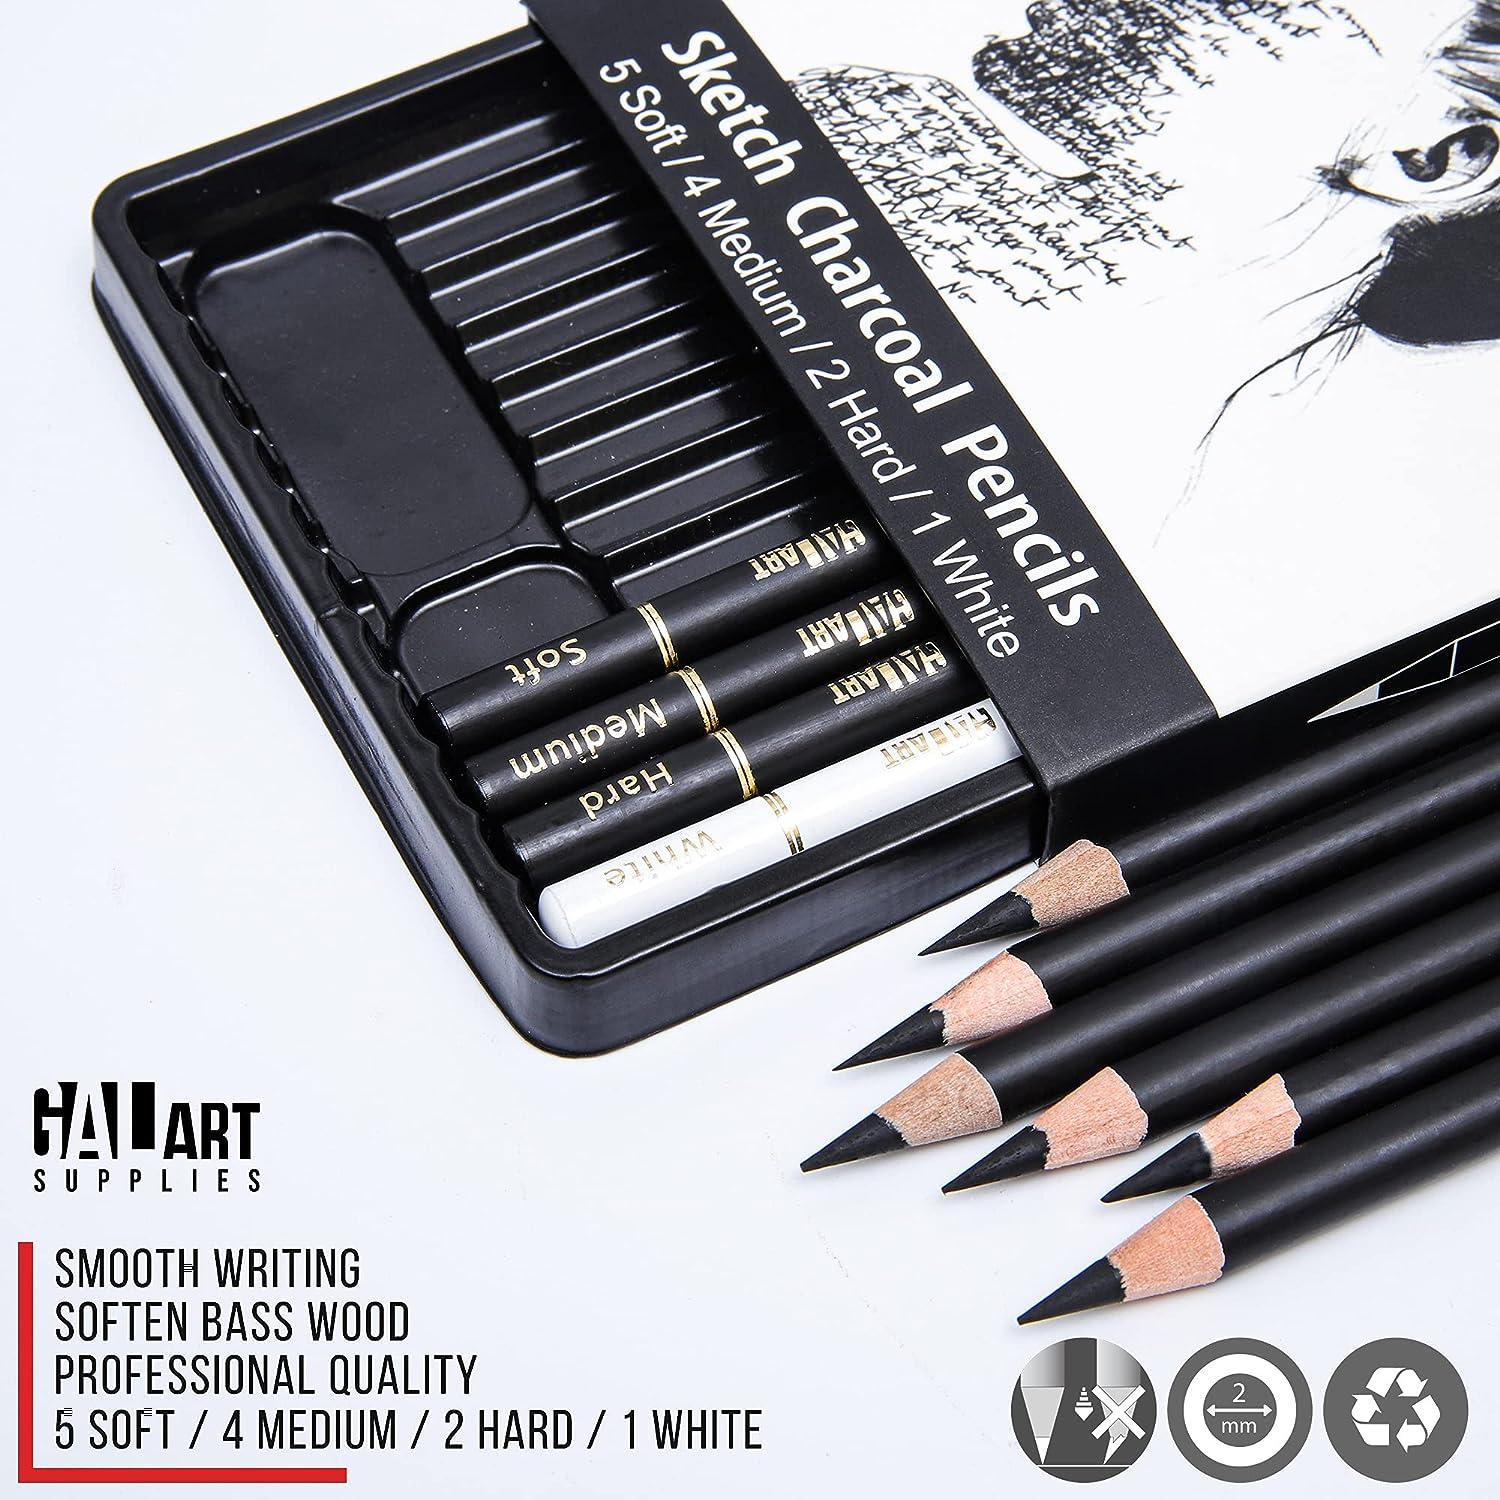 MISULOVE Professional Charcoal Pencils Drawing Set - 12 Pieces